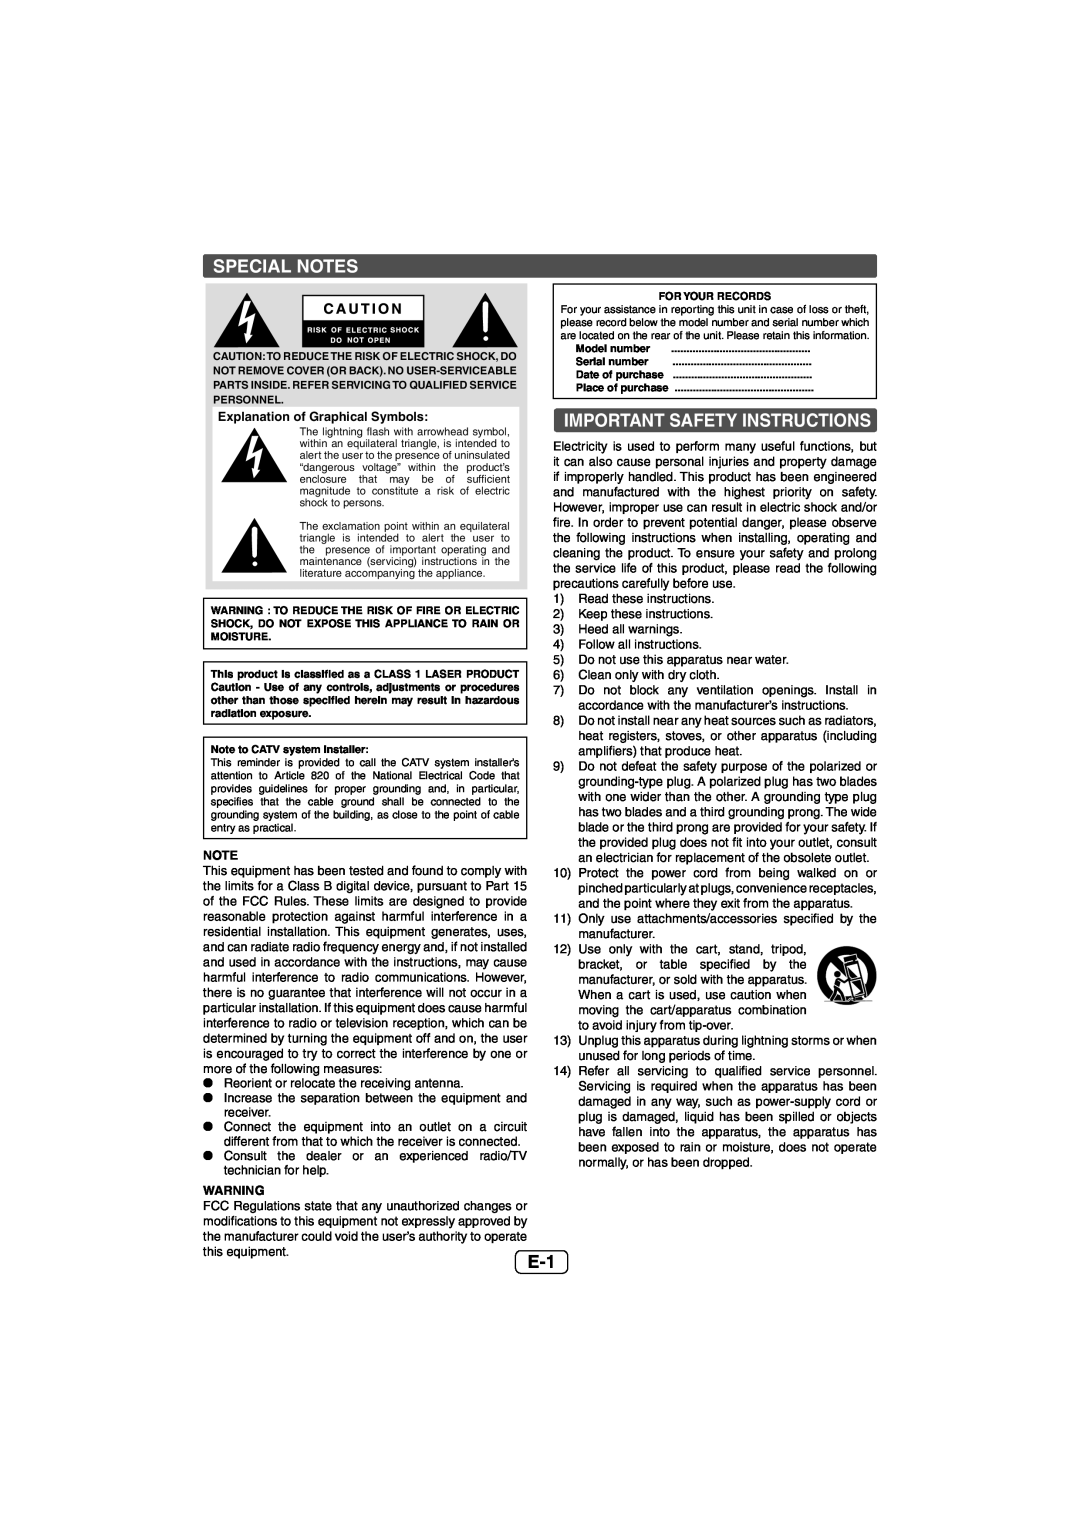 Sharp DHS1050P operation manual Special Notes, Important Safety Instructions 